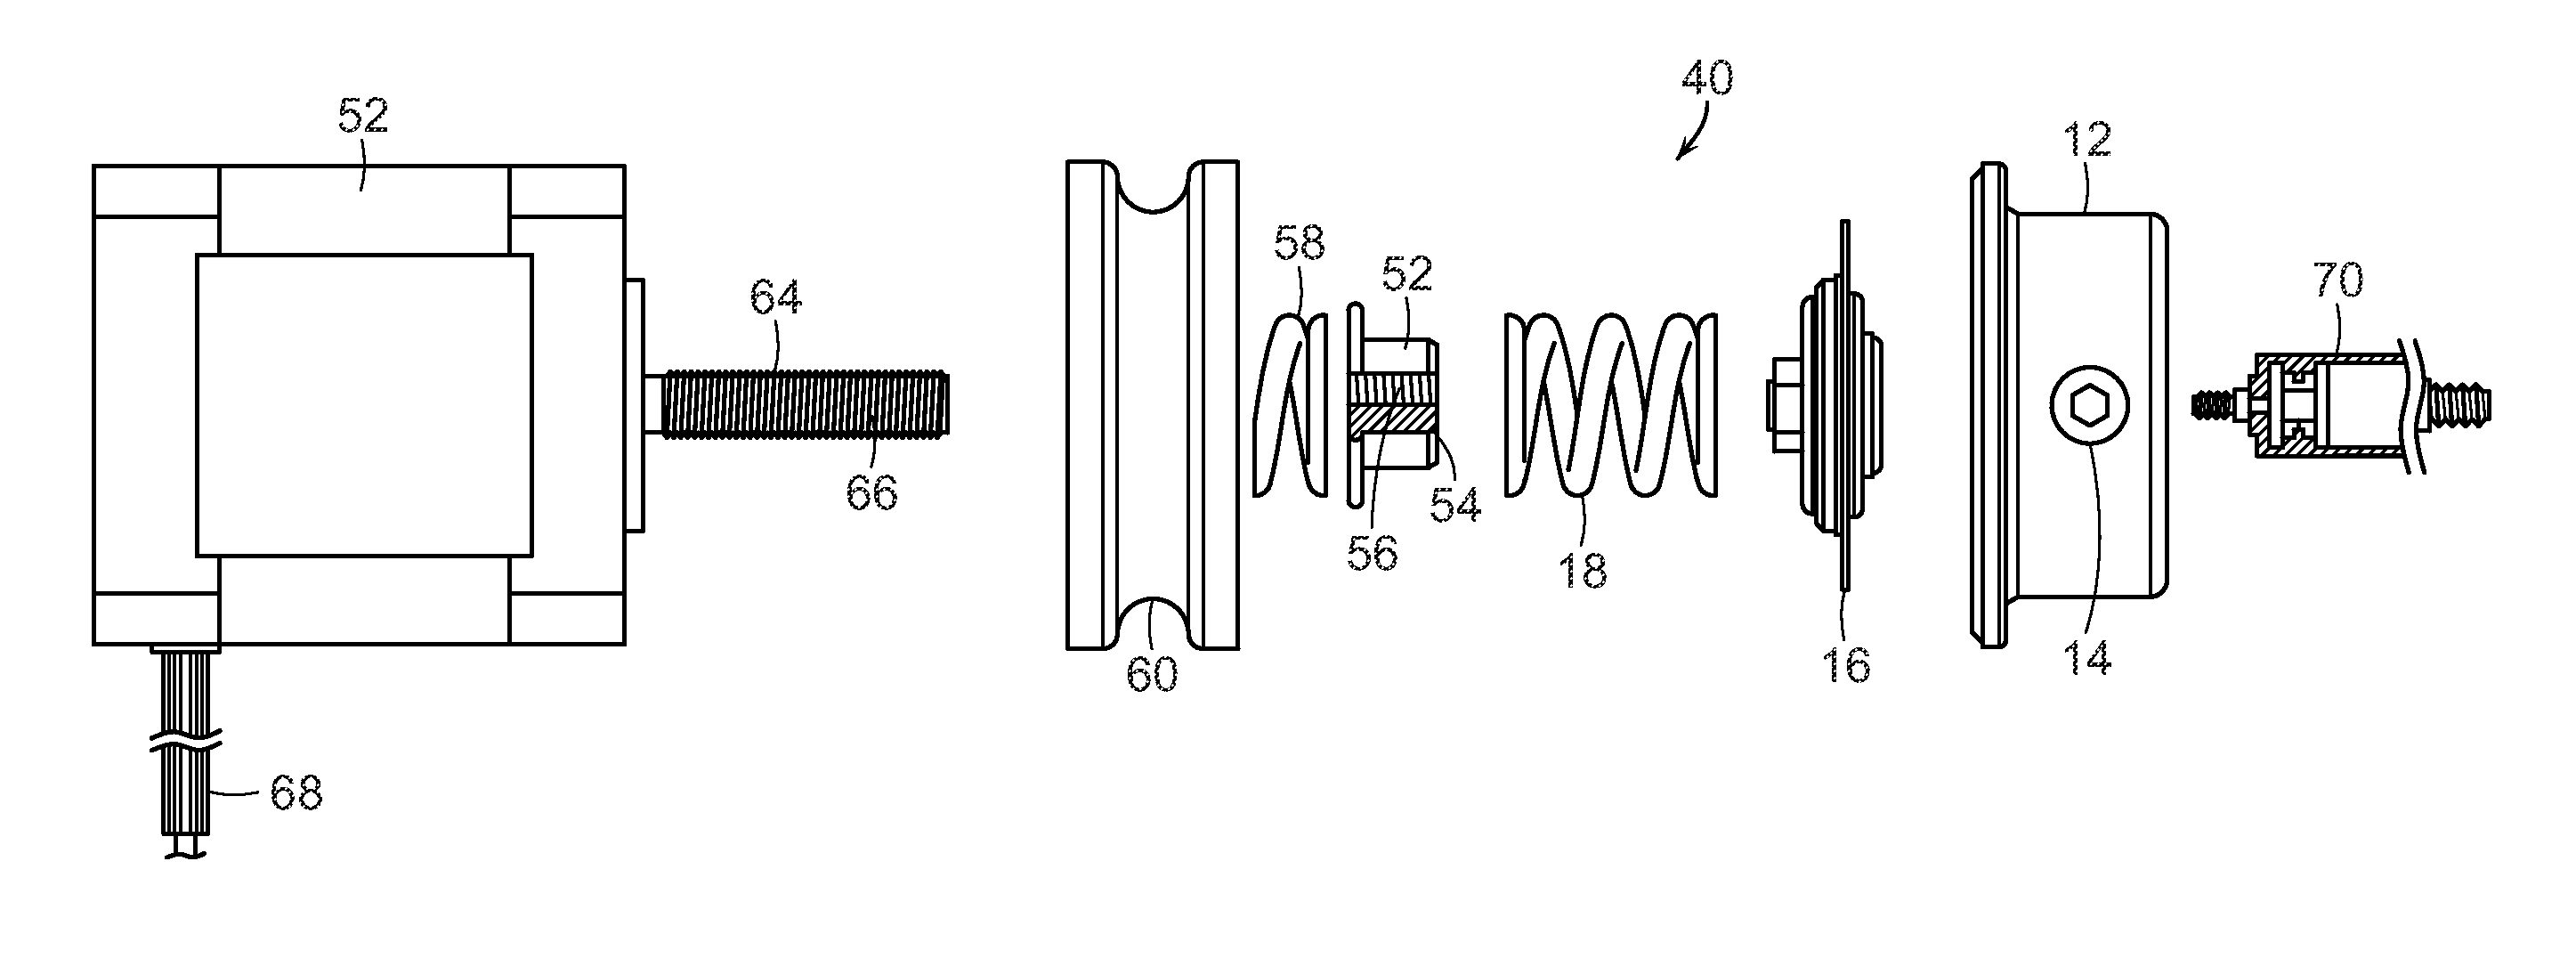 Fuel pressure control system for an internal combustion engine